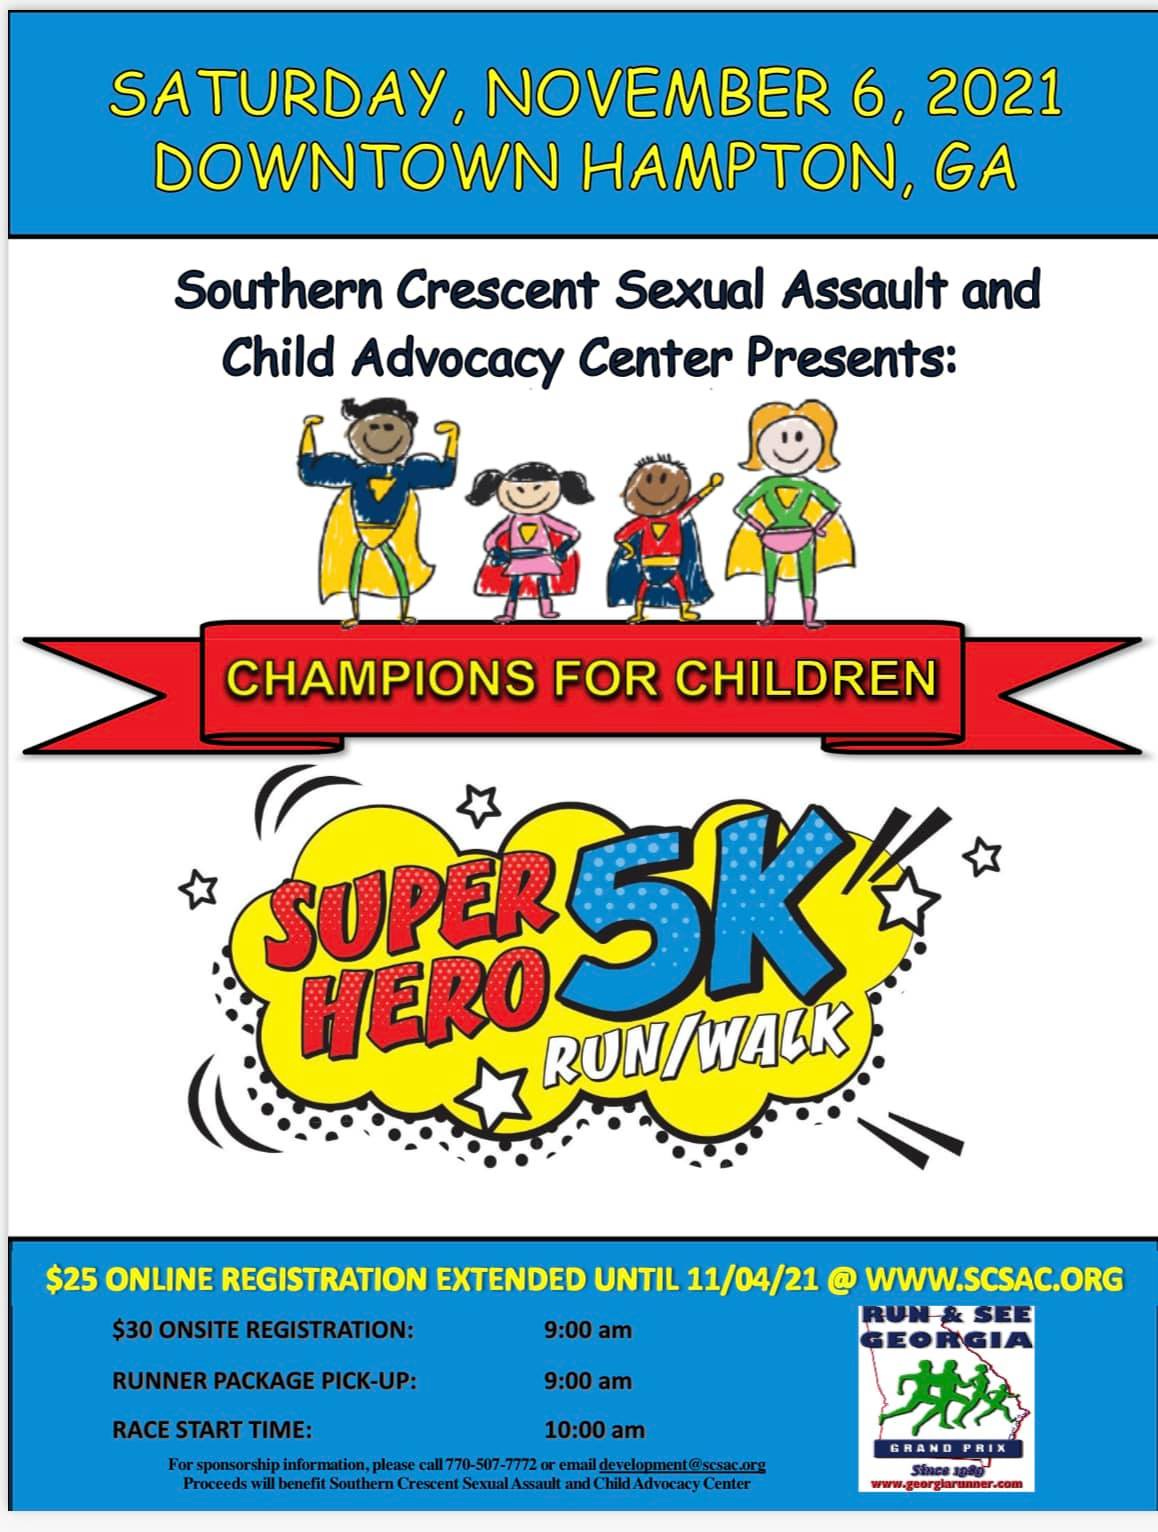 May be a cartoon of text that says "SATURDAY, NOVEMBER 6, 2021 DOWNTOWN HAMPTON, GA Southern Crescent Sexual Assault and Child Advocacy Center Presents: CHAMPIONS FOR CHILDREN SUPER RUN/ /WALK SUPER5K $25 ONLINE REGISTRATION EXTENDED UNTIL 11/04/21 @ WWW.SCSAC.ORG $30 ONSITE REGISTRATION: RUNNER PACKAGE PICK-UP: RACE START TIME: 9:00 am 9:00 am Proceeds information, please benefit Southern 10:00 am email 0-507-77 Sexual lopment@ scsac.org Advocacy PRI ก www-"